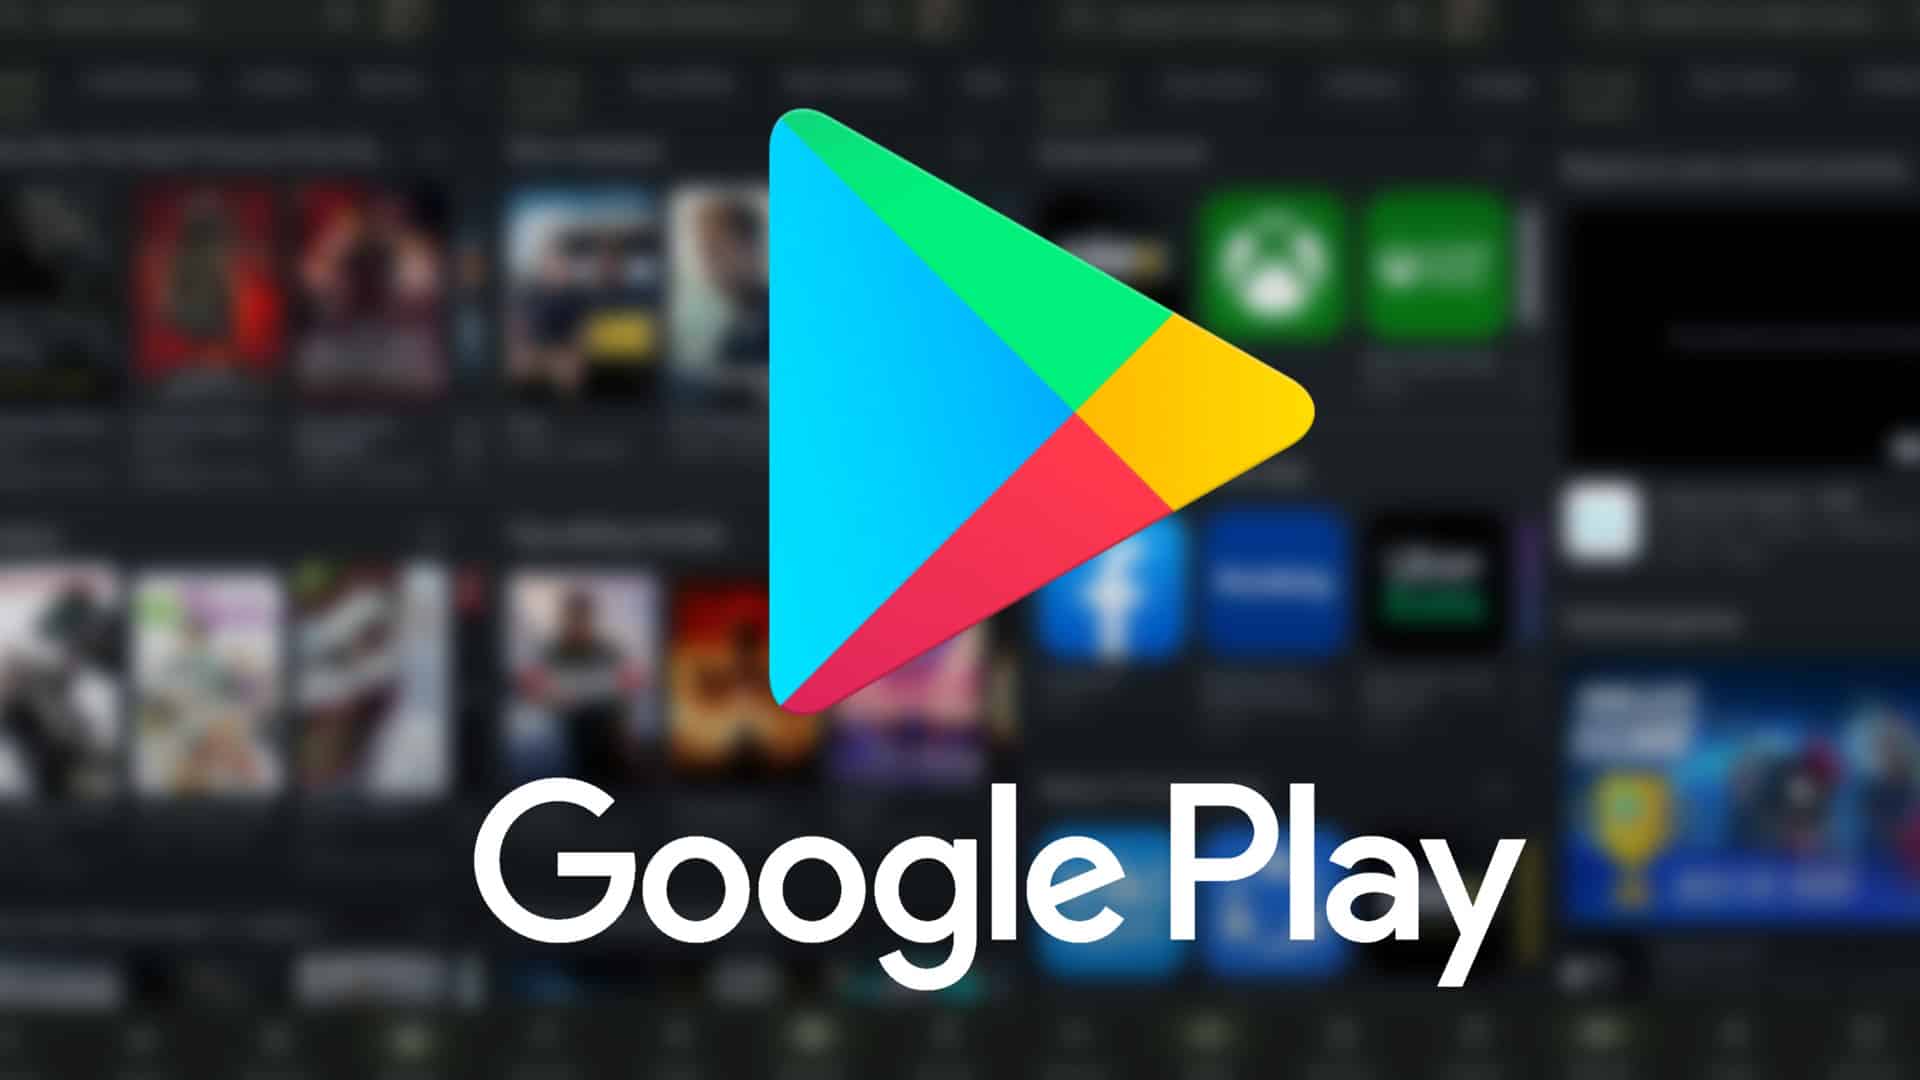 games play by google. recording